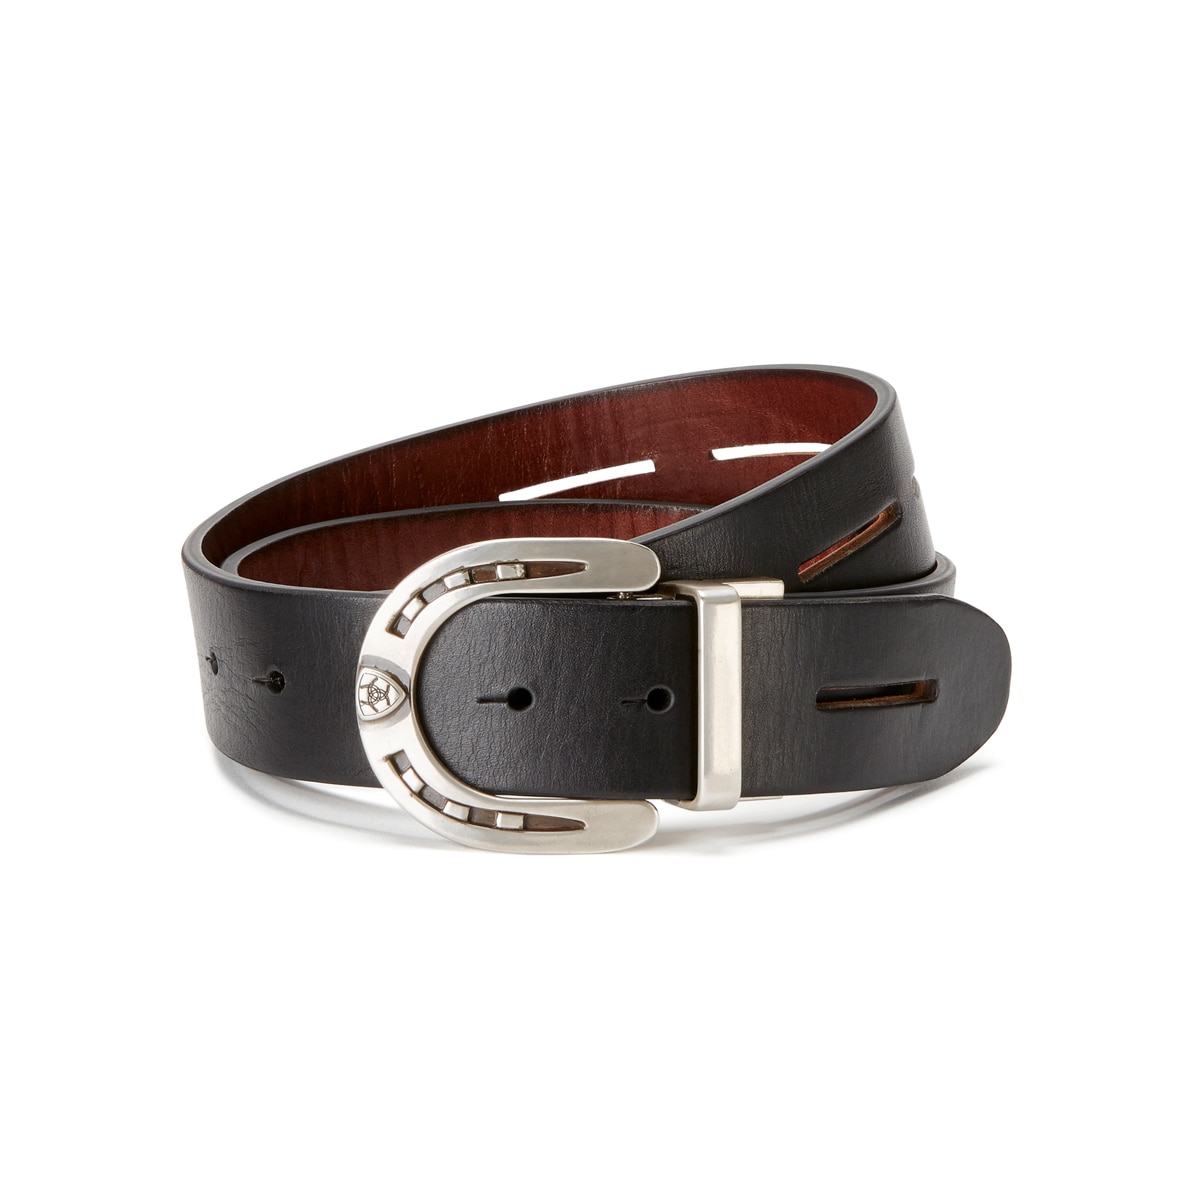 Accessories, Reversible Belt With Silver Buckle Closure